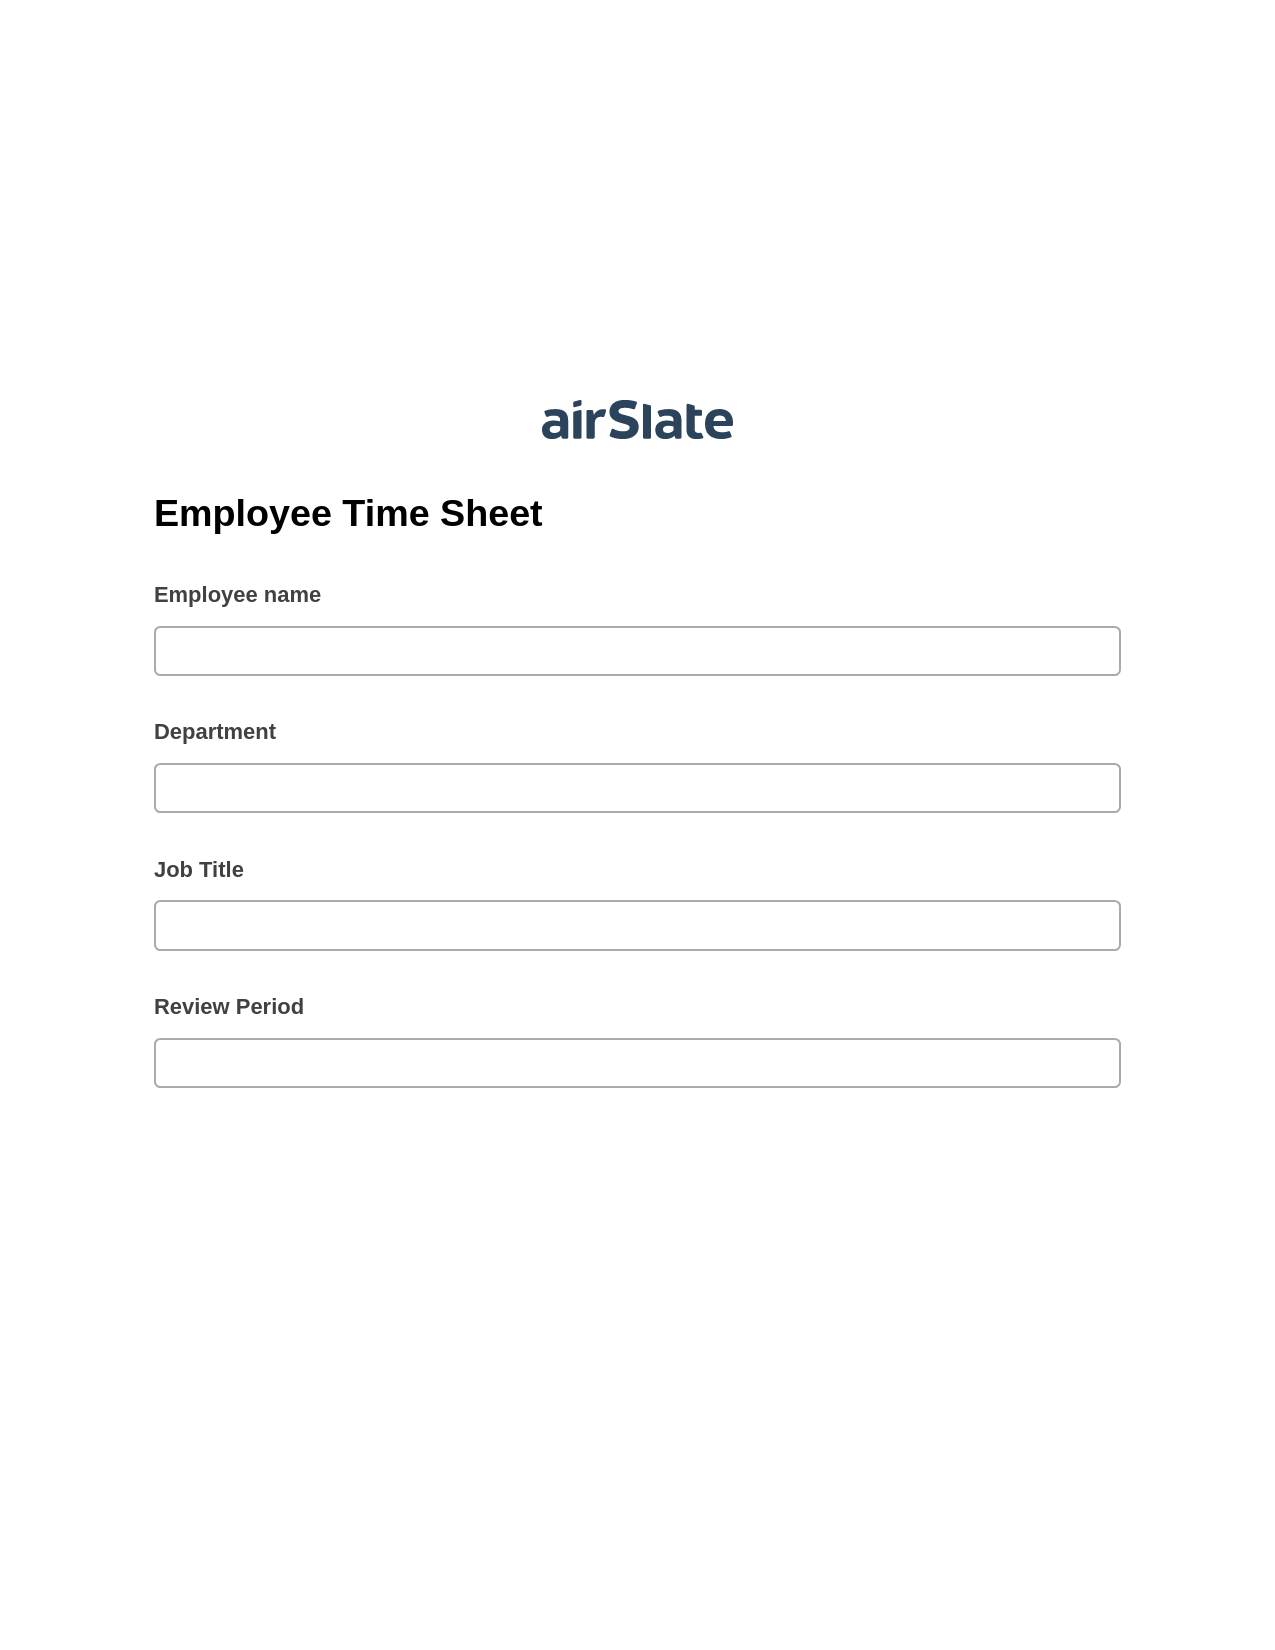 Employee Time Sheet Pre-fill from Excel Spreadsheet Bot, Create slate from another Flow Bot, Webhook Postfinish Bot